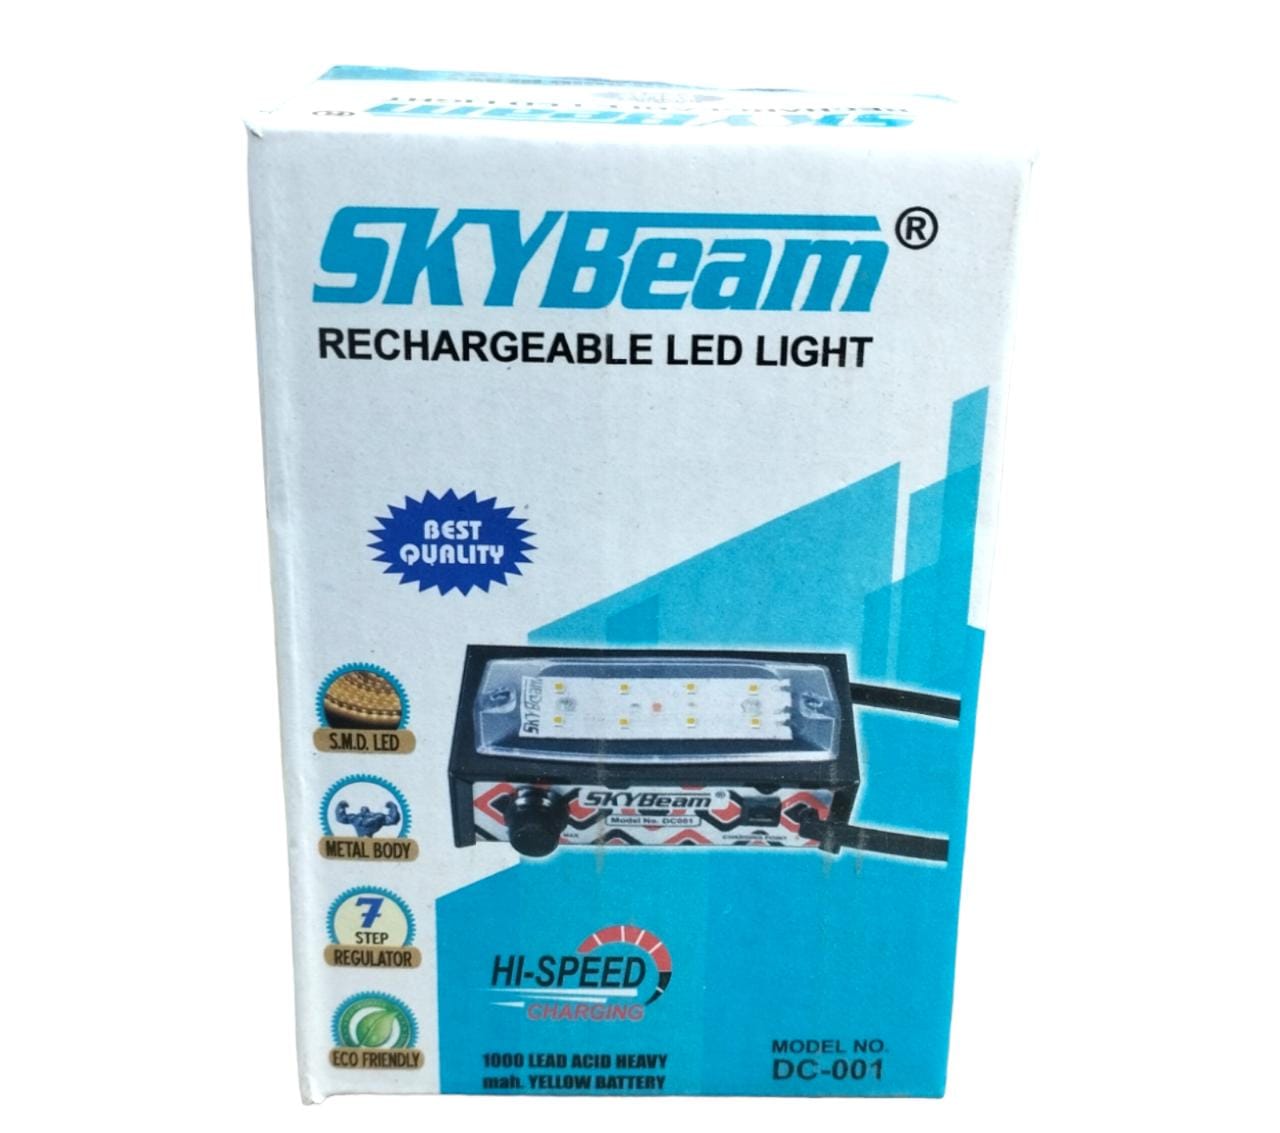 Sky beam  rechargeable led light 